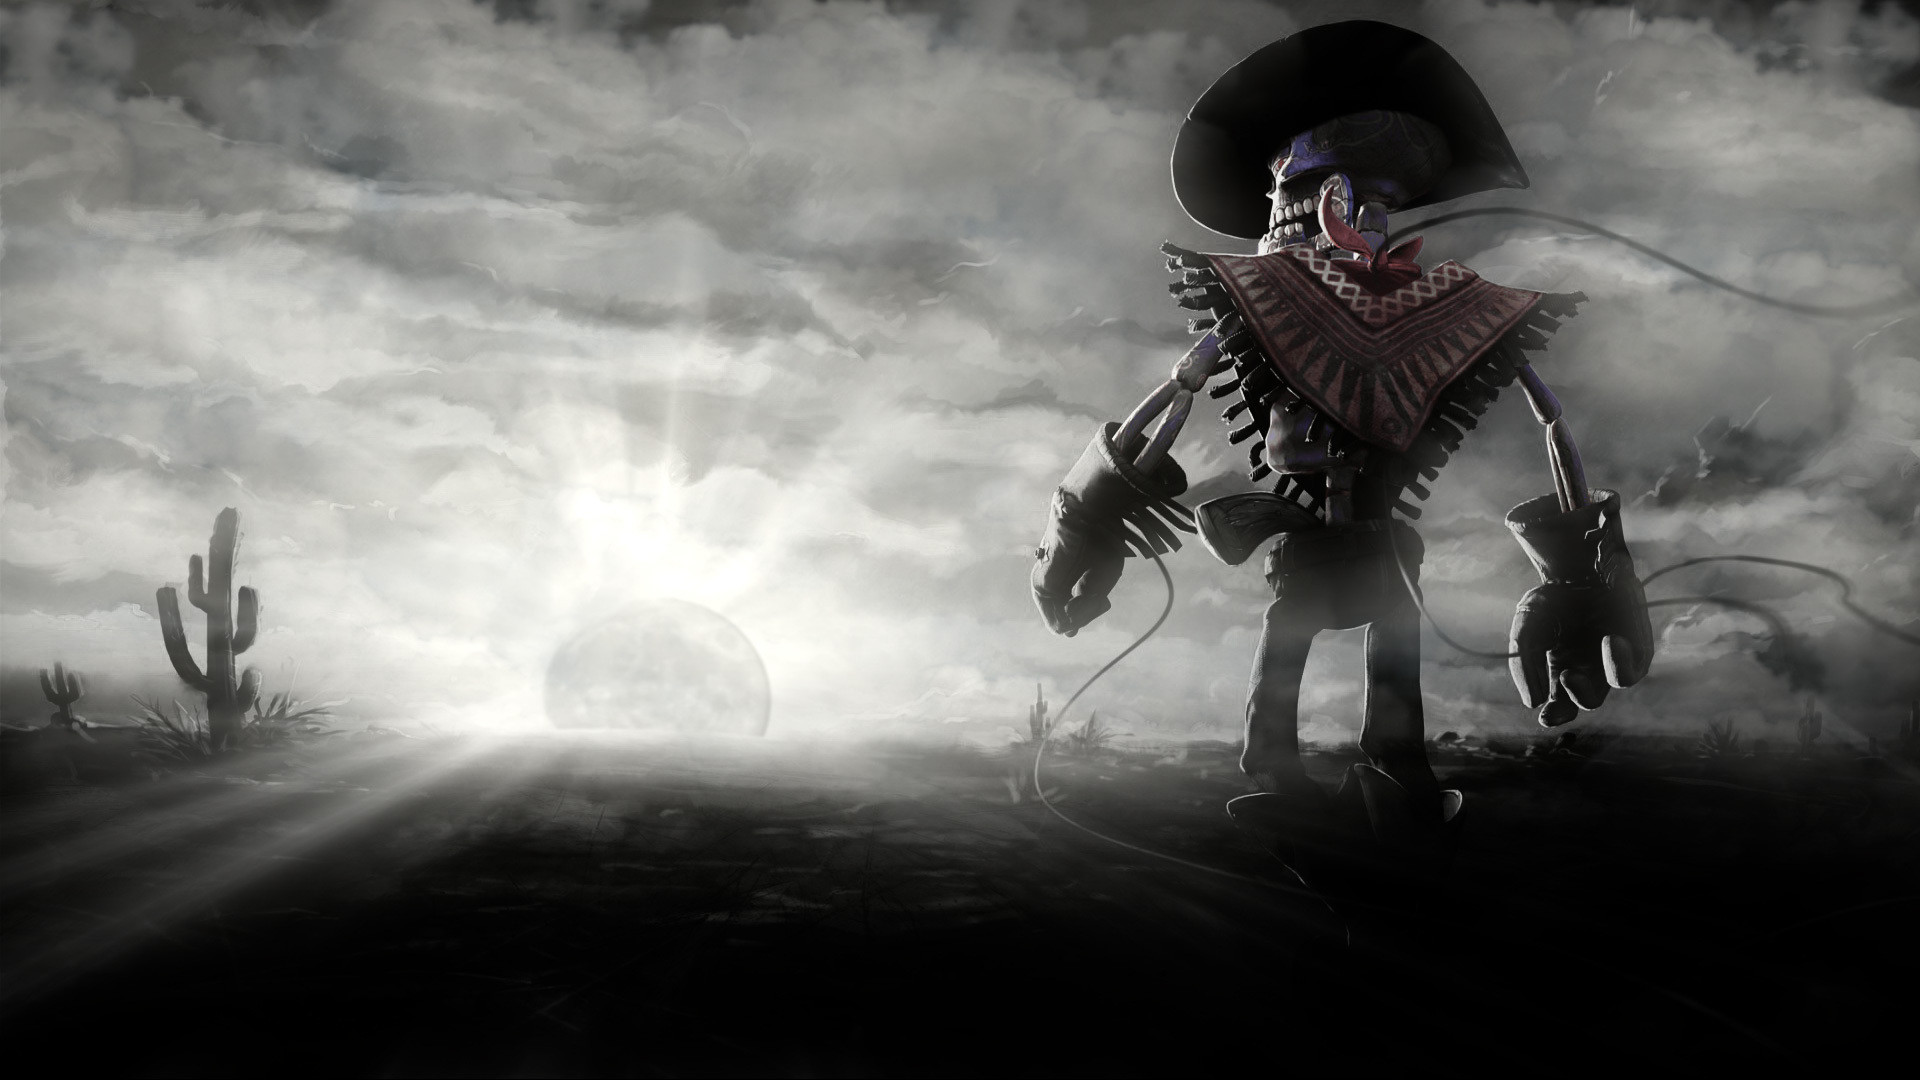 1920x1080 Free Cowboy Wallpapers High Quality